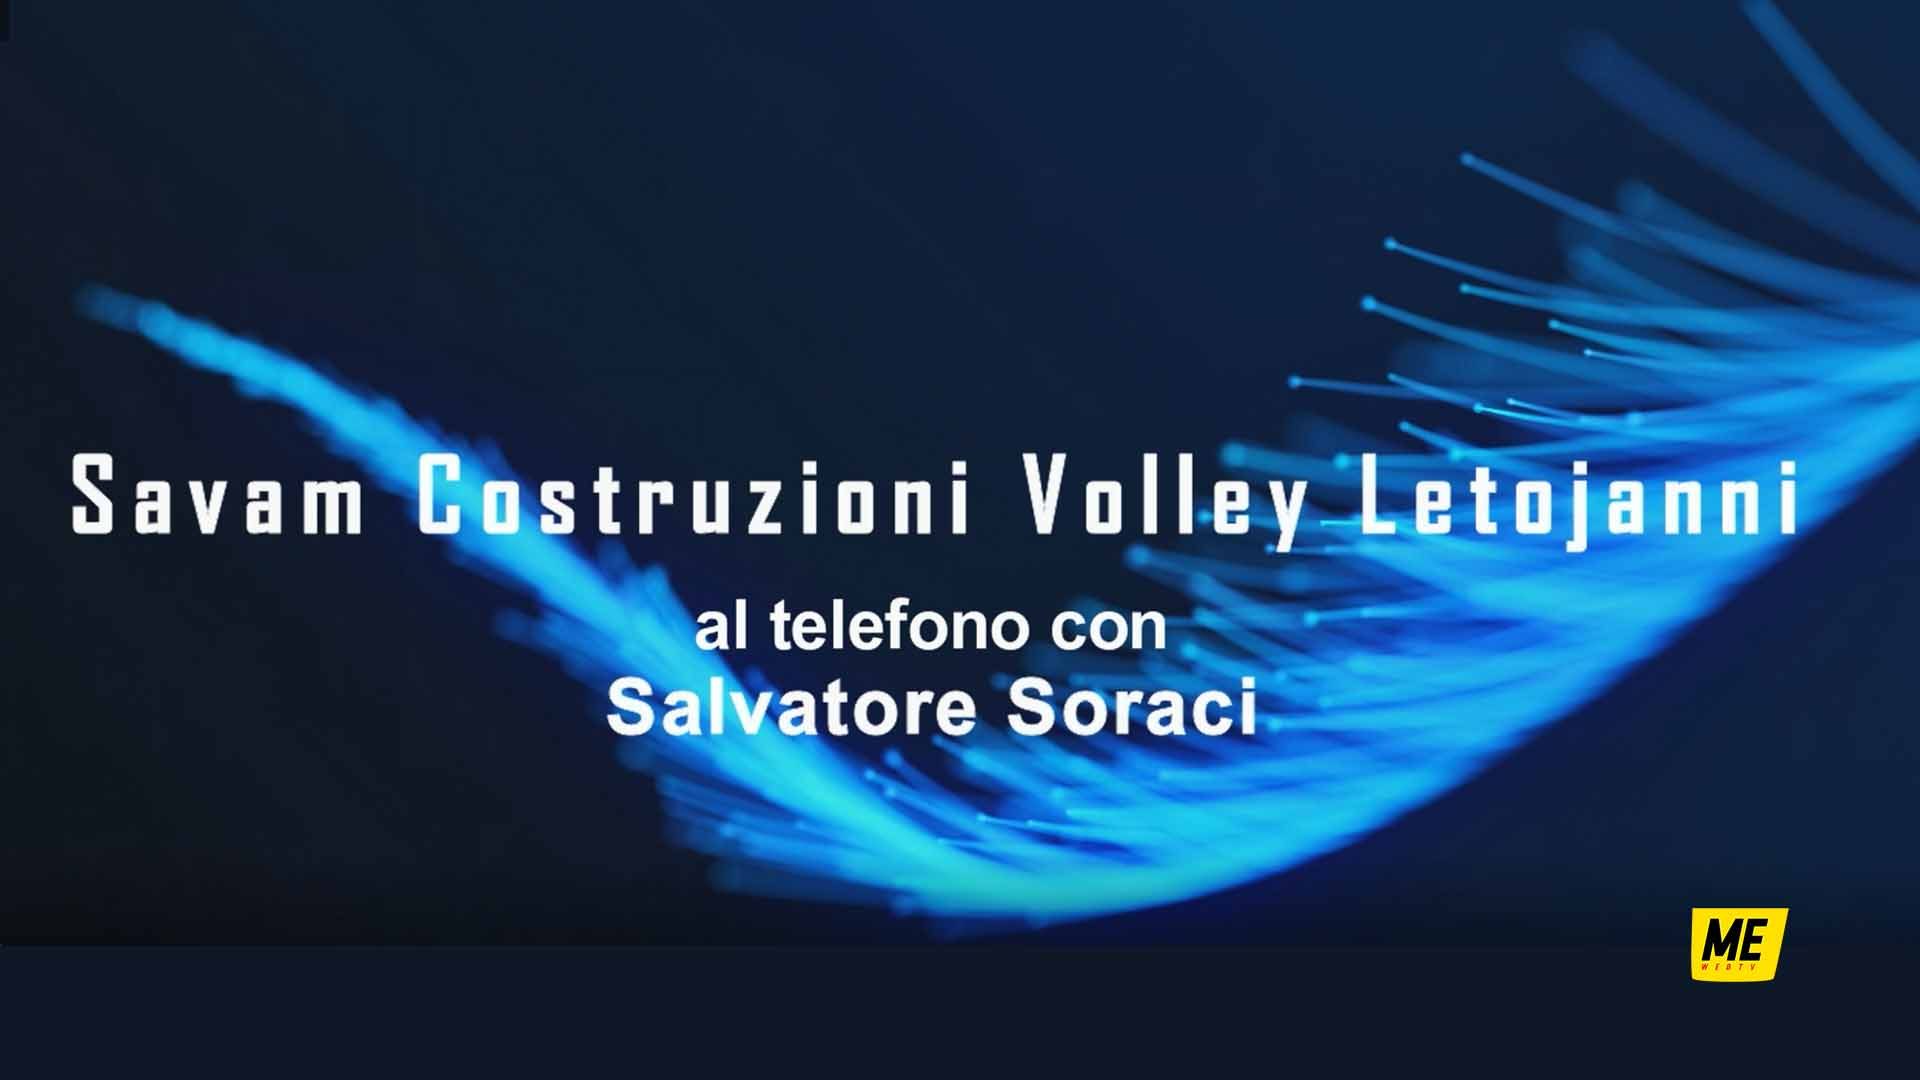 Volley Letoianni